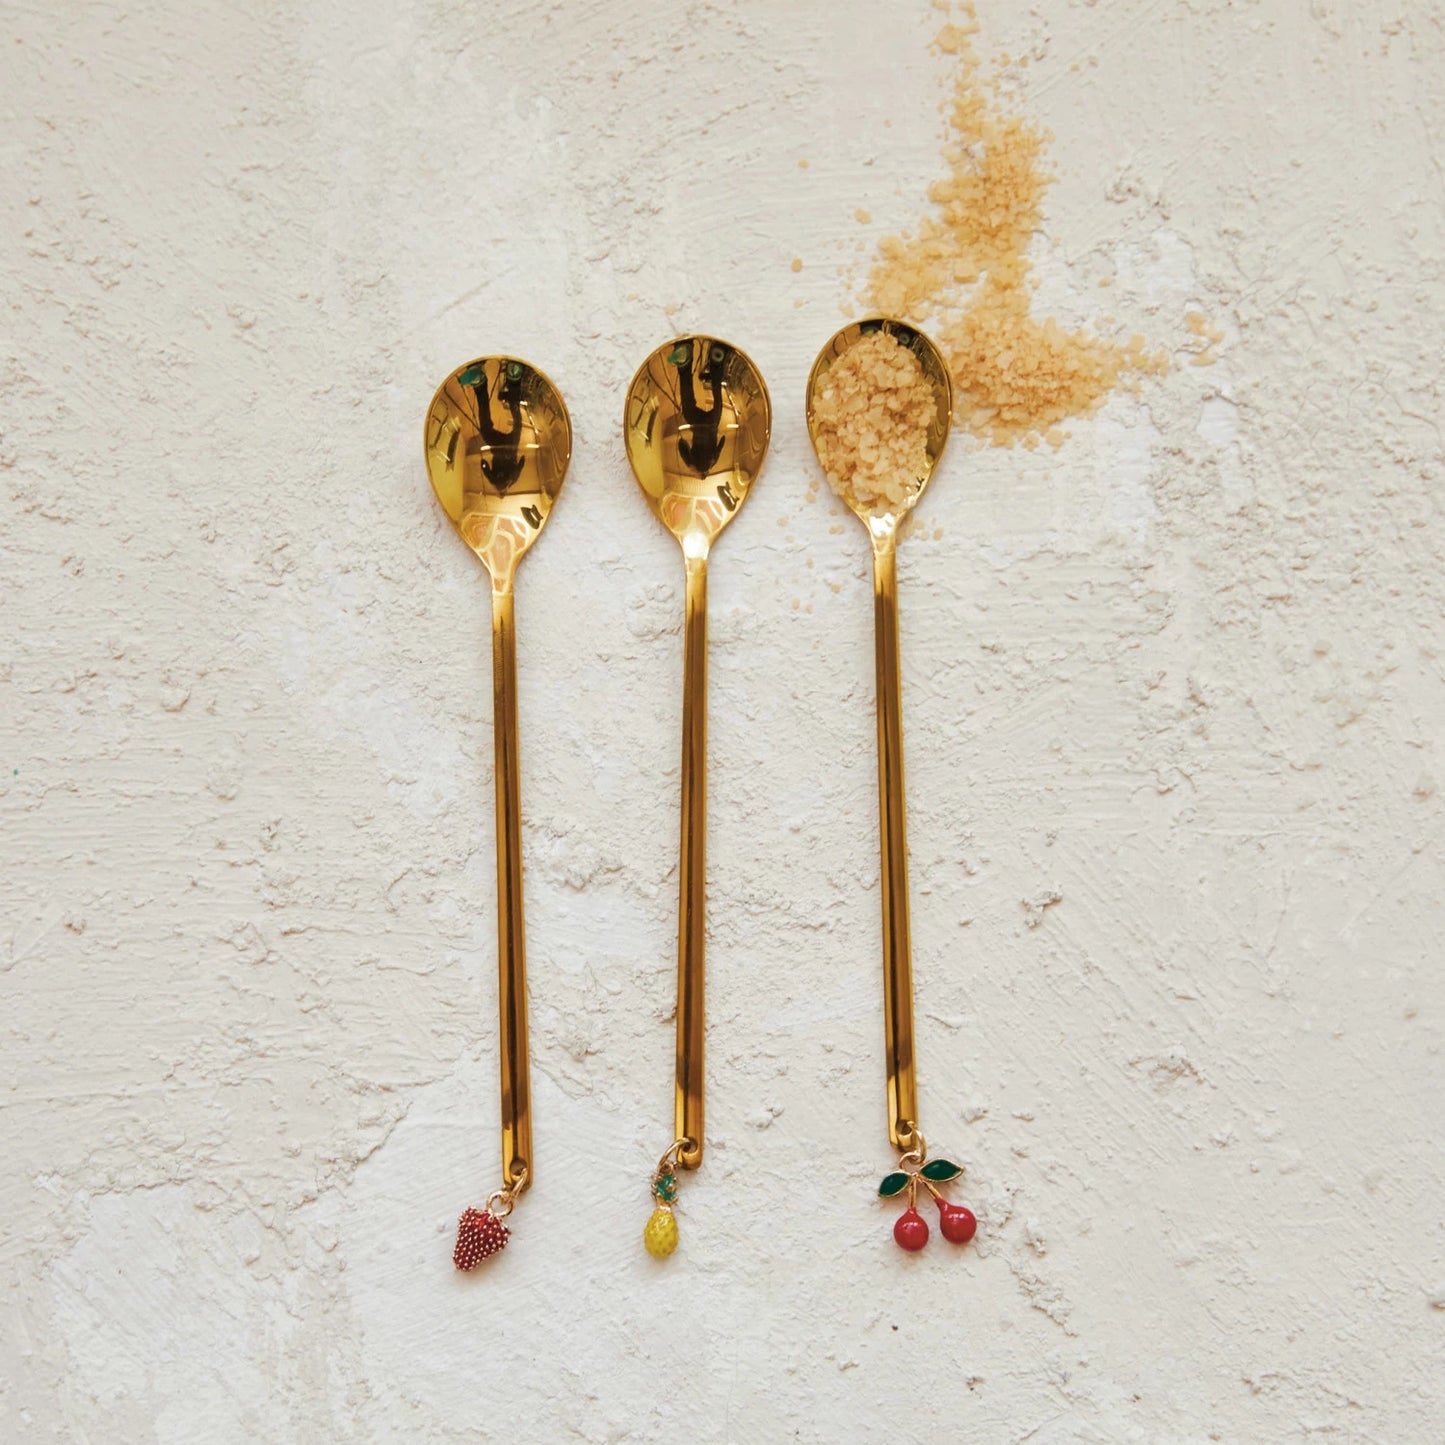 Stainless Steel Spoon with Fruit Charm